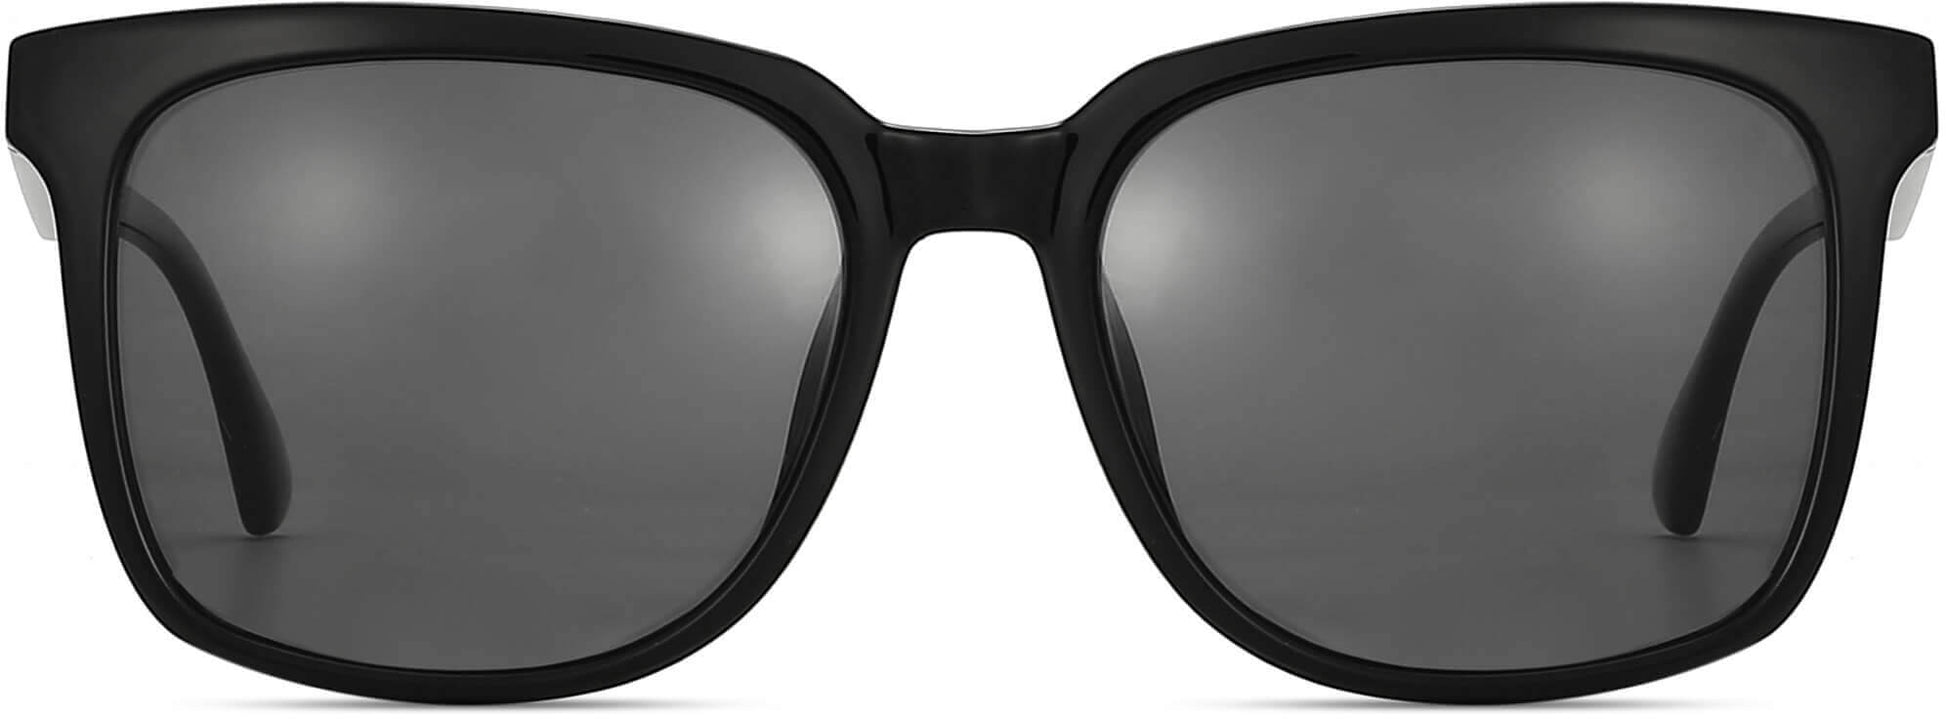 Nick Black TR 90 Sunglasses from ANRRI, front view